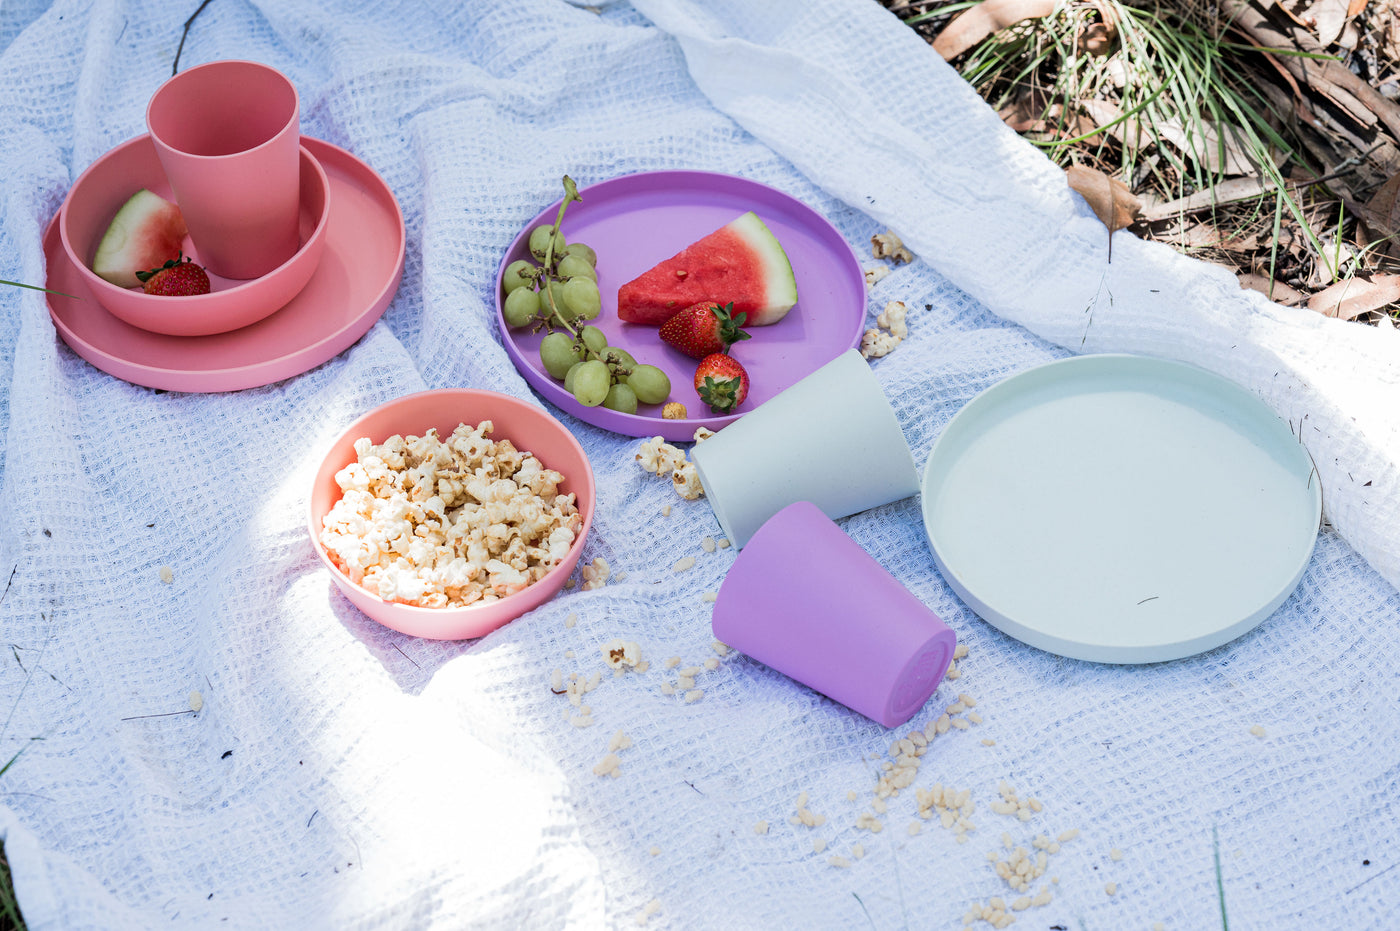 Sustainable Dinnerware: The Future of Eco-Friendly Eating